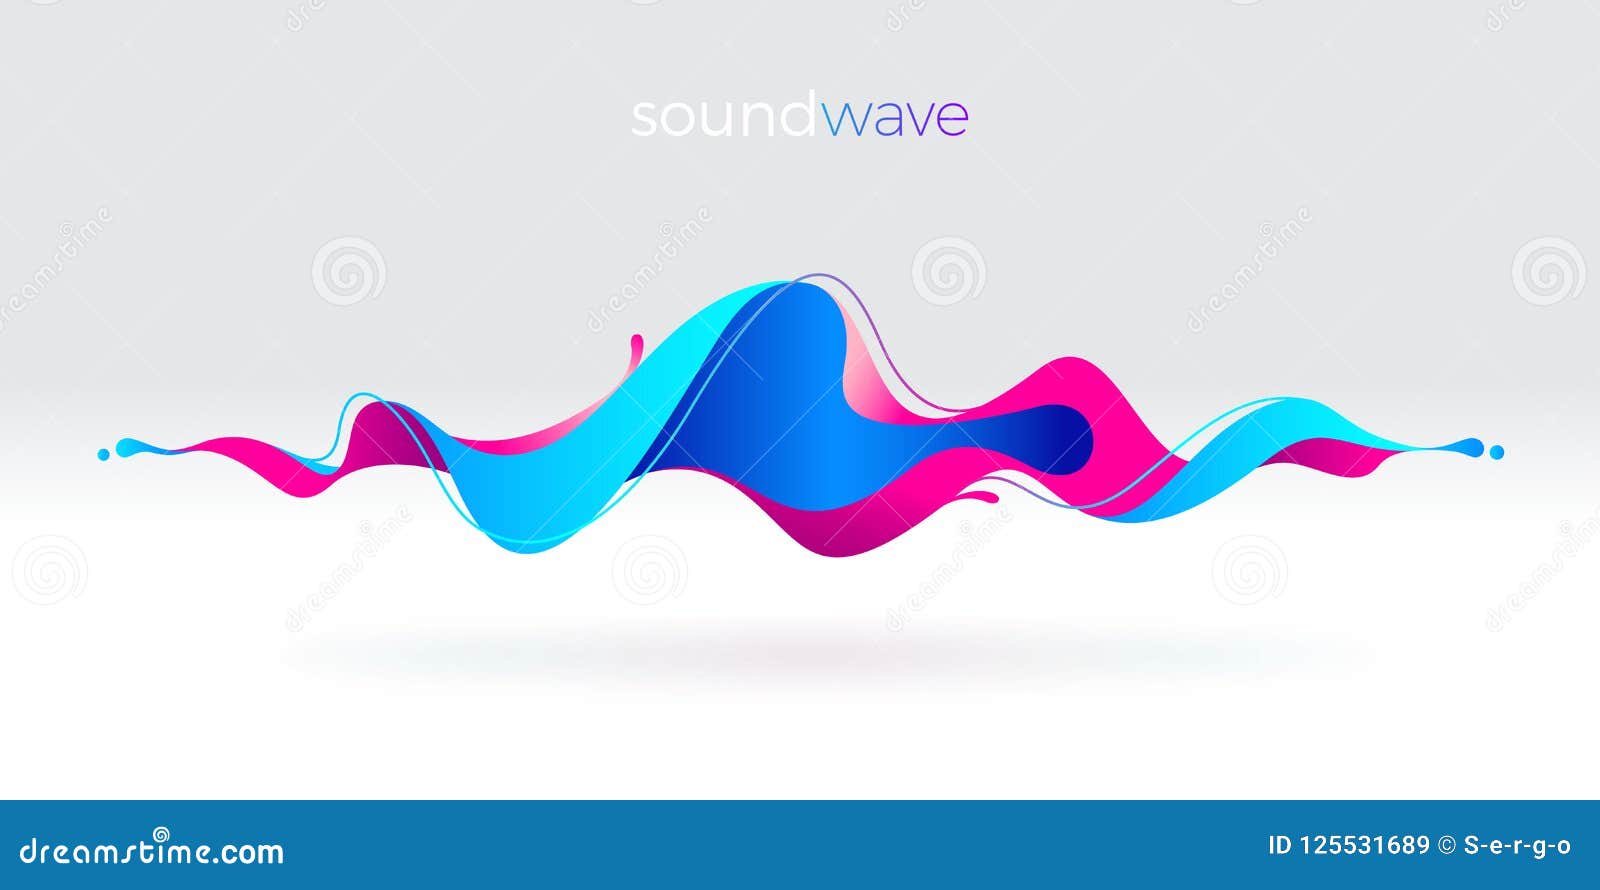 multicolored abstract fluid sound wave.